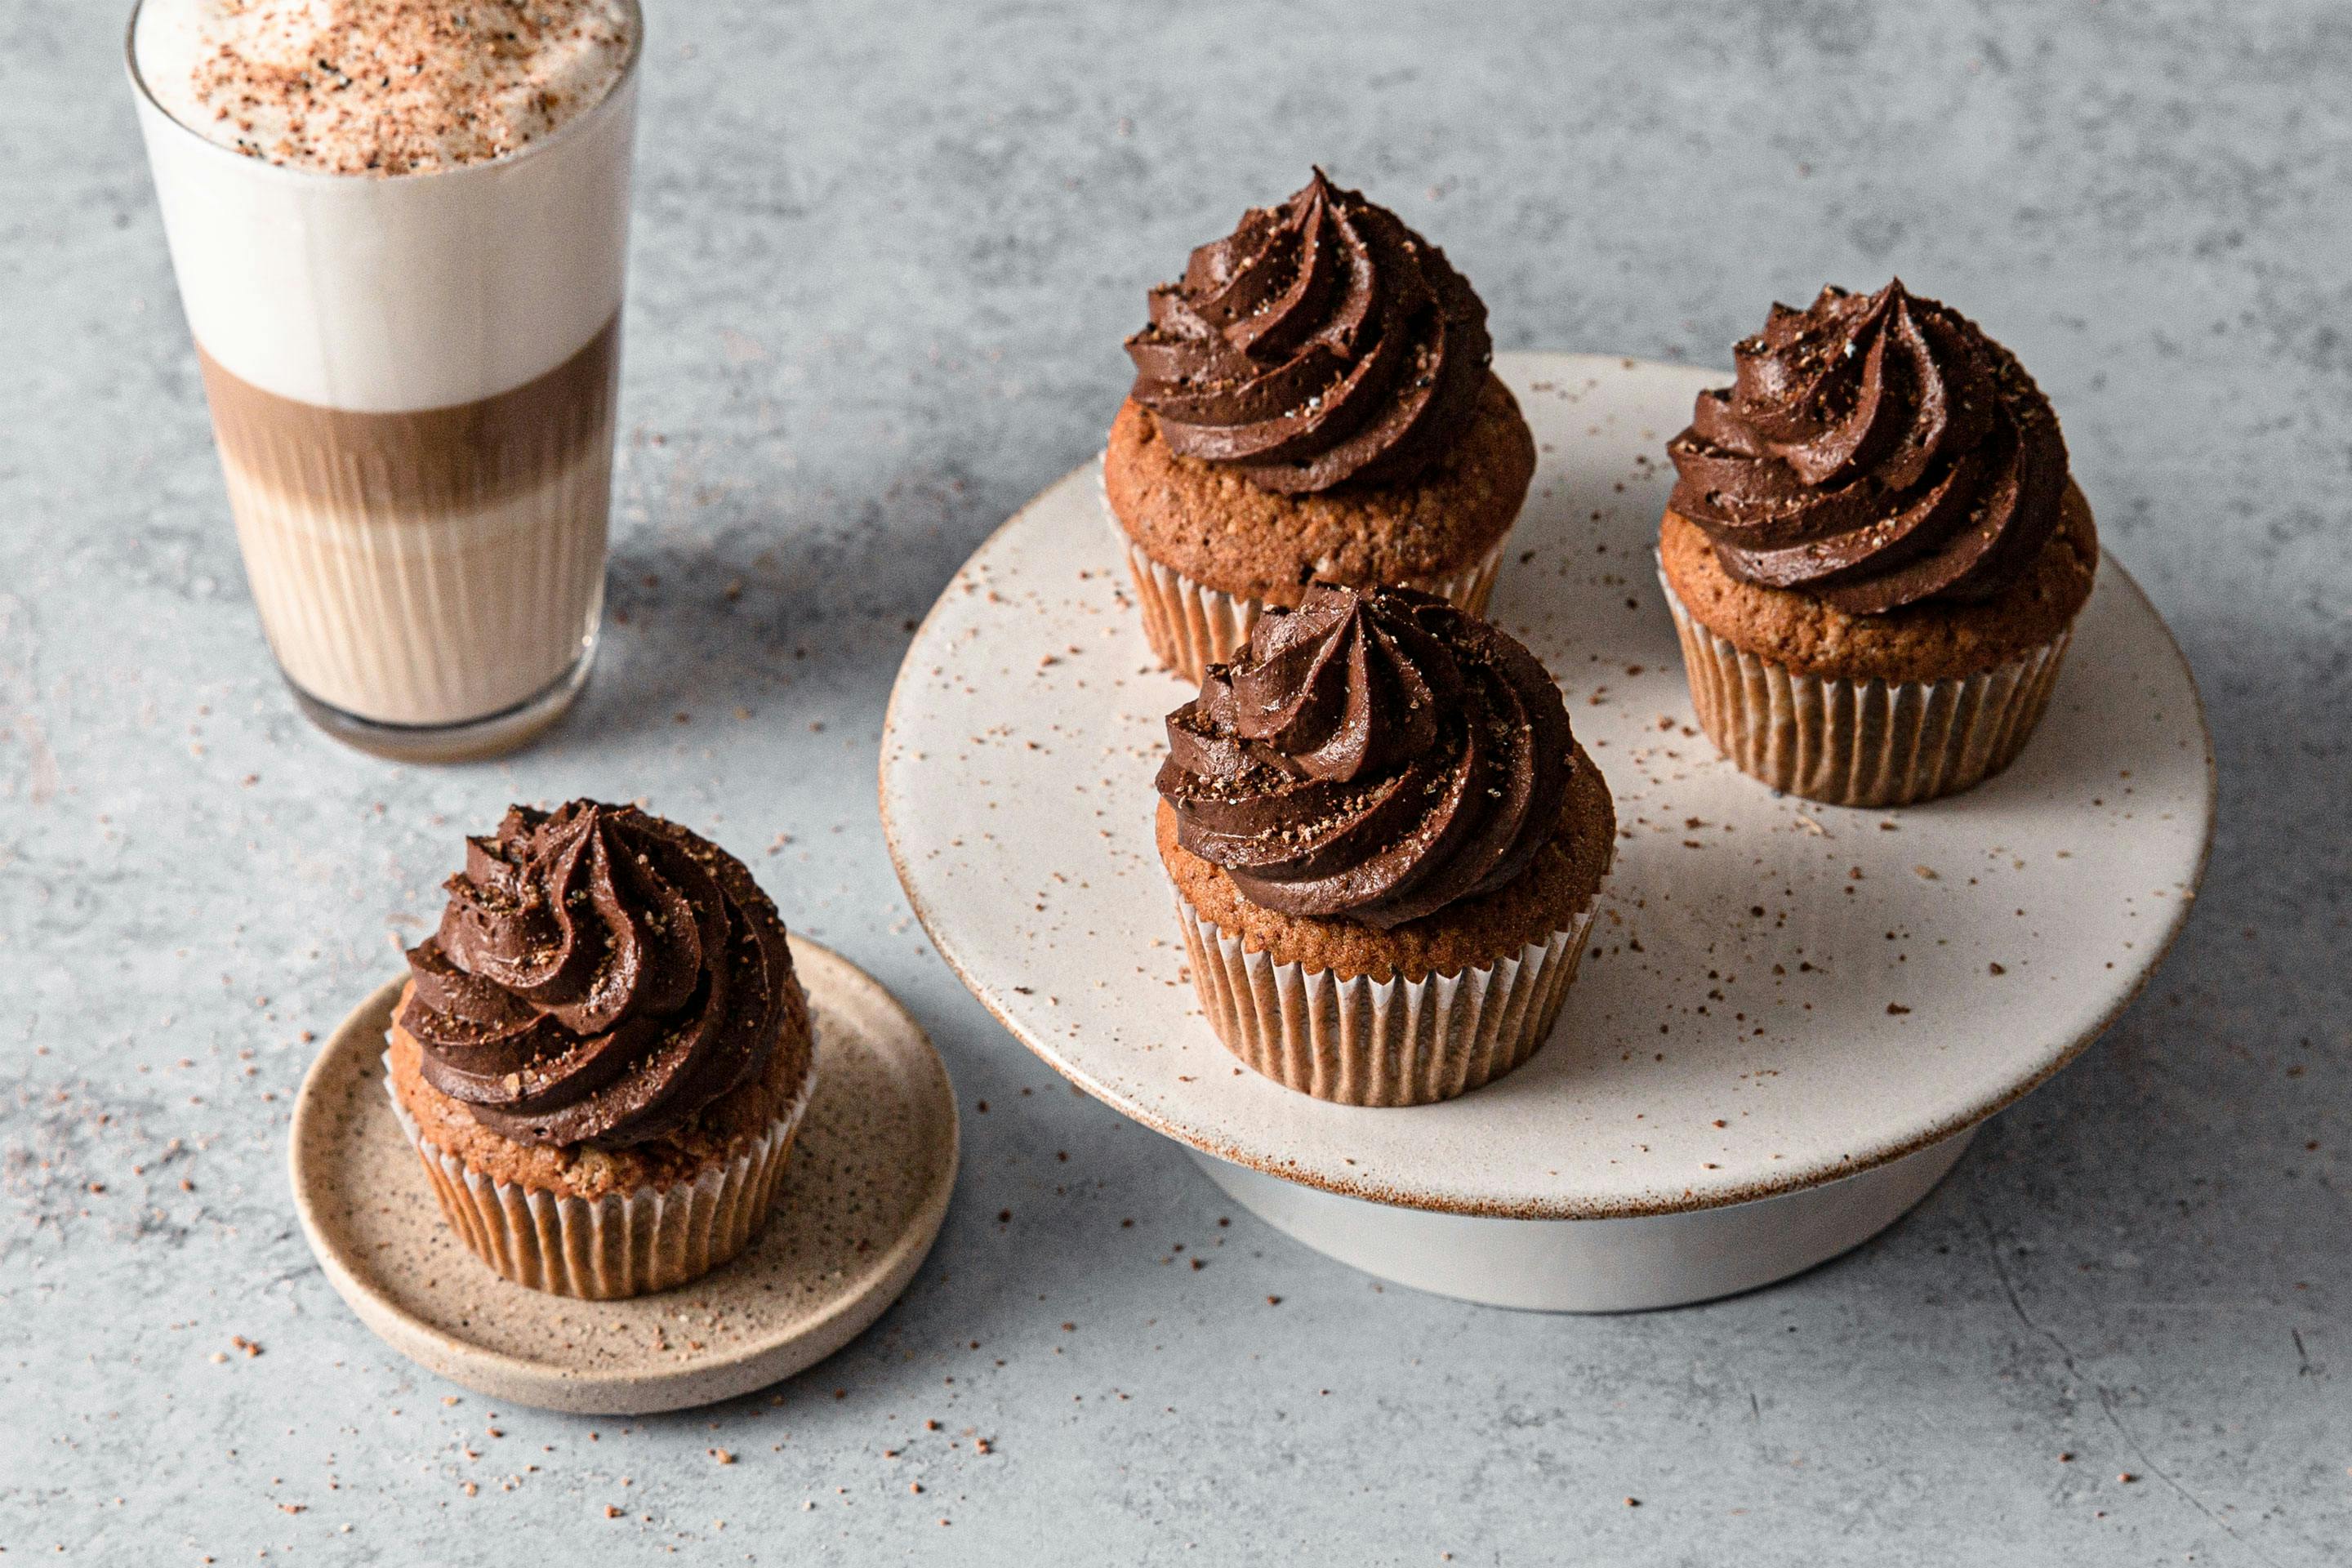 Hazelnut muffins with a dark chocolate topping on a cake plate. Next to it is a layered latte macchiato on a gray work surface.